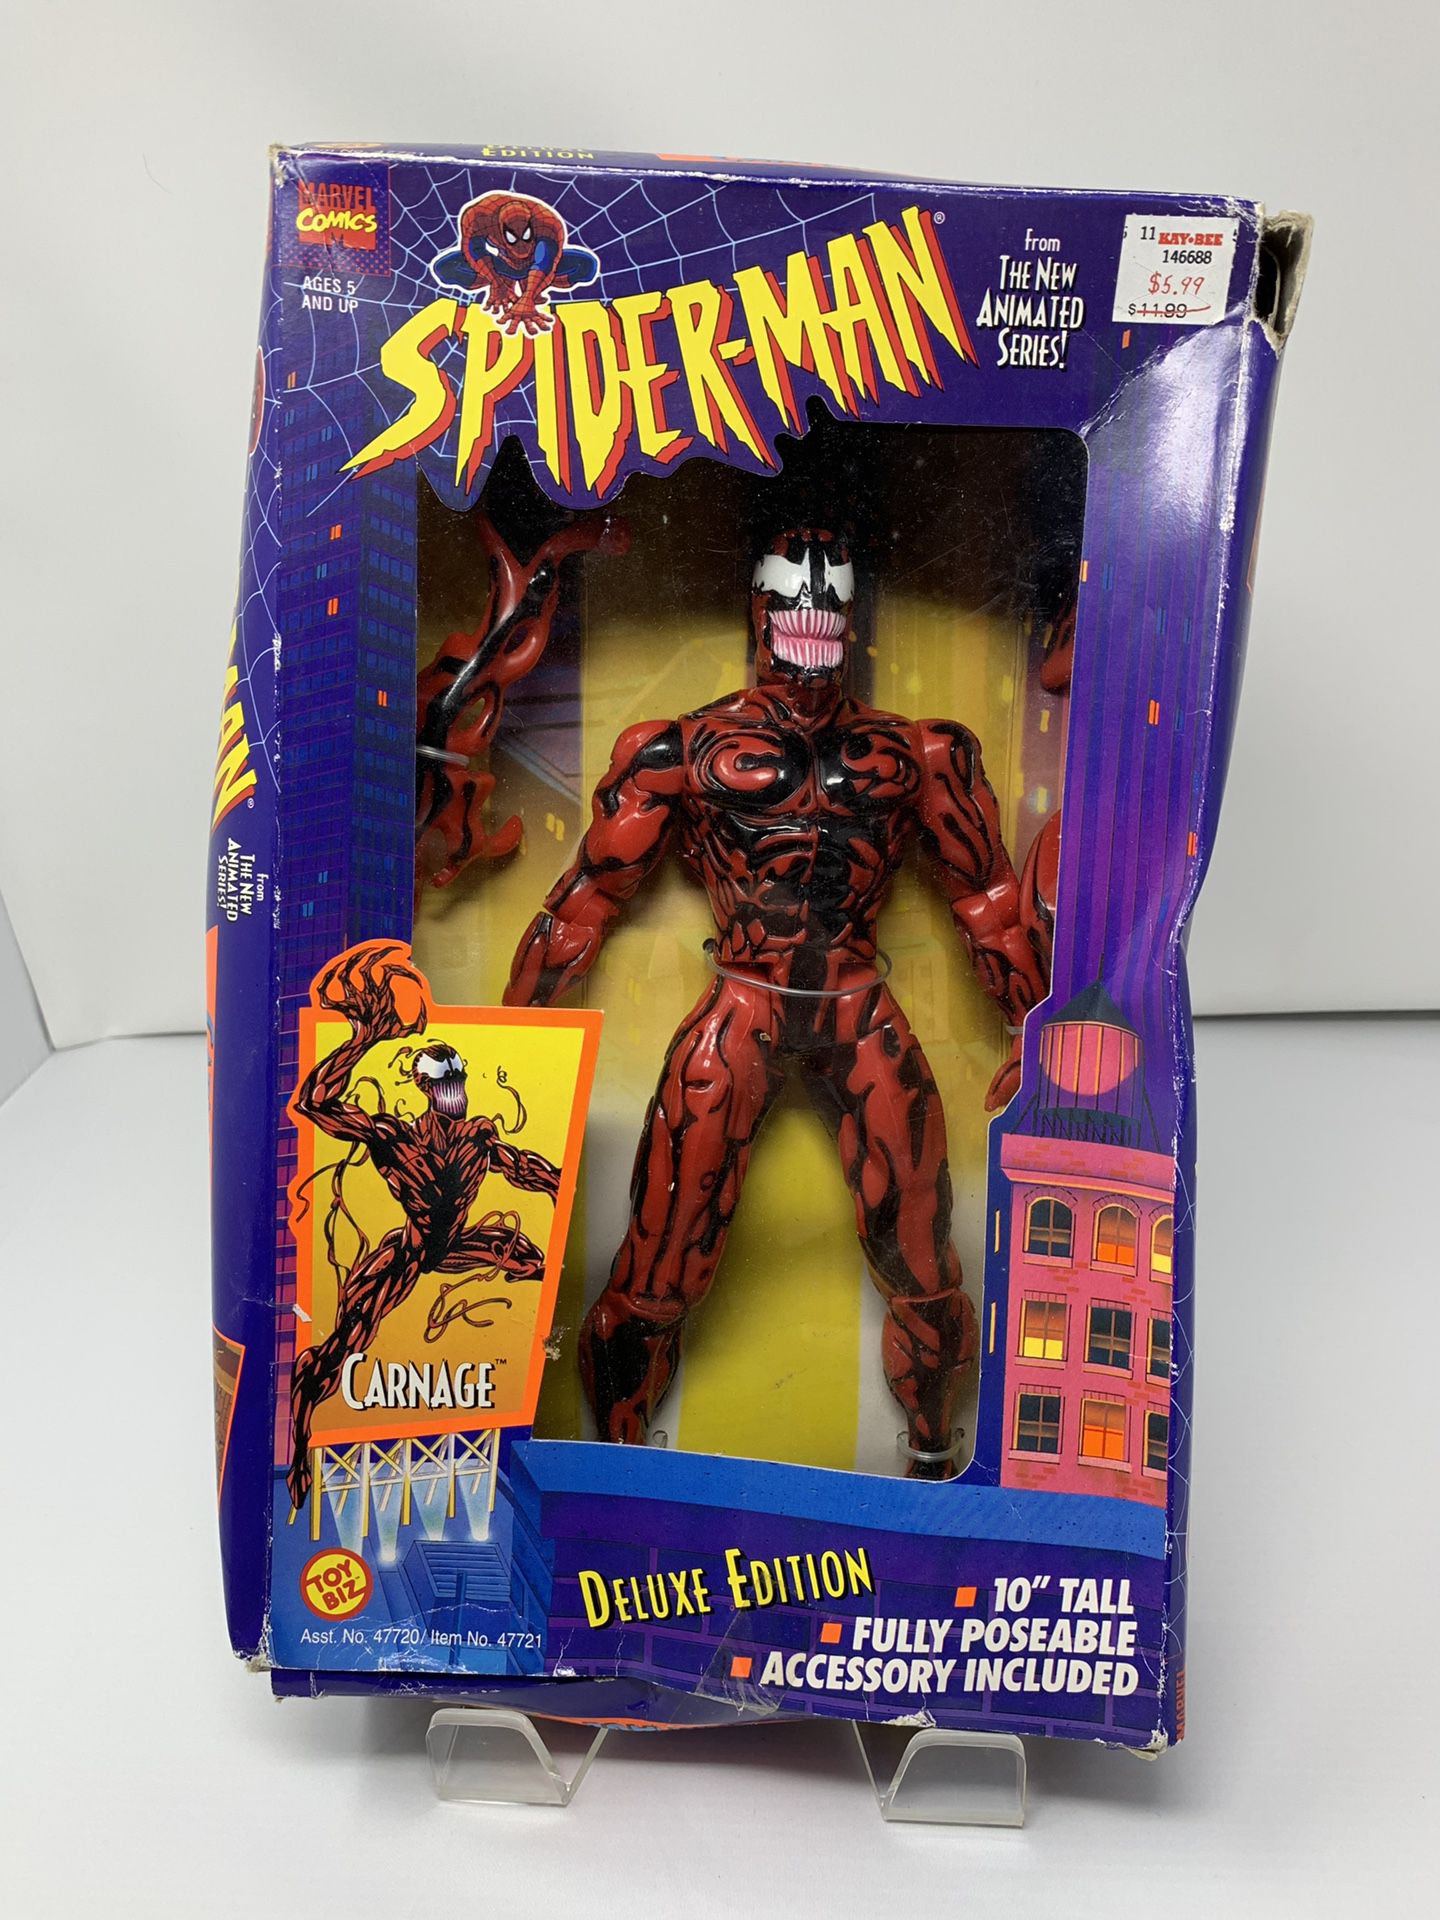 Brand New Carnage Villain of Spider-Man (From the Hit 90’s series) 10” Action Figure (Smushed Box)